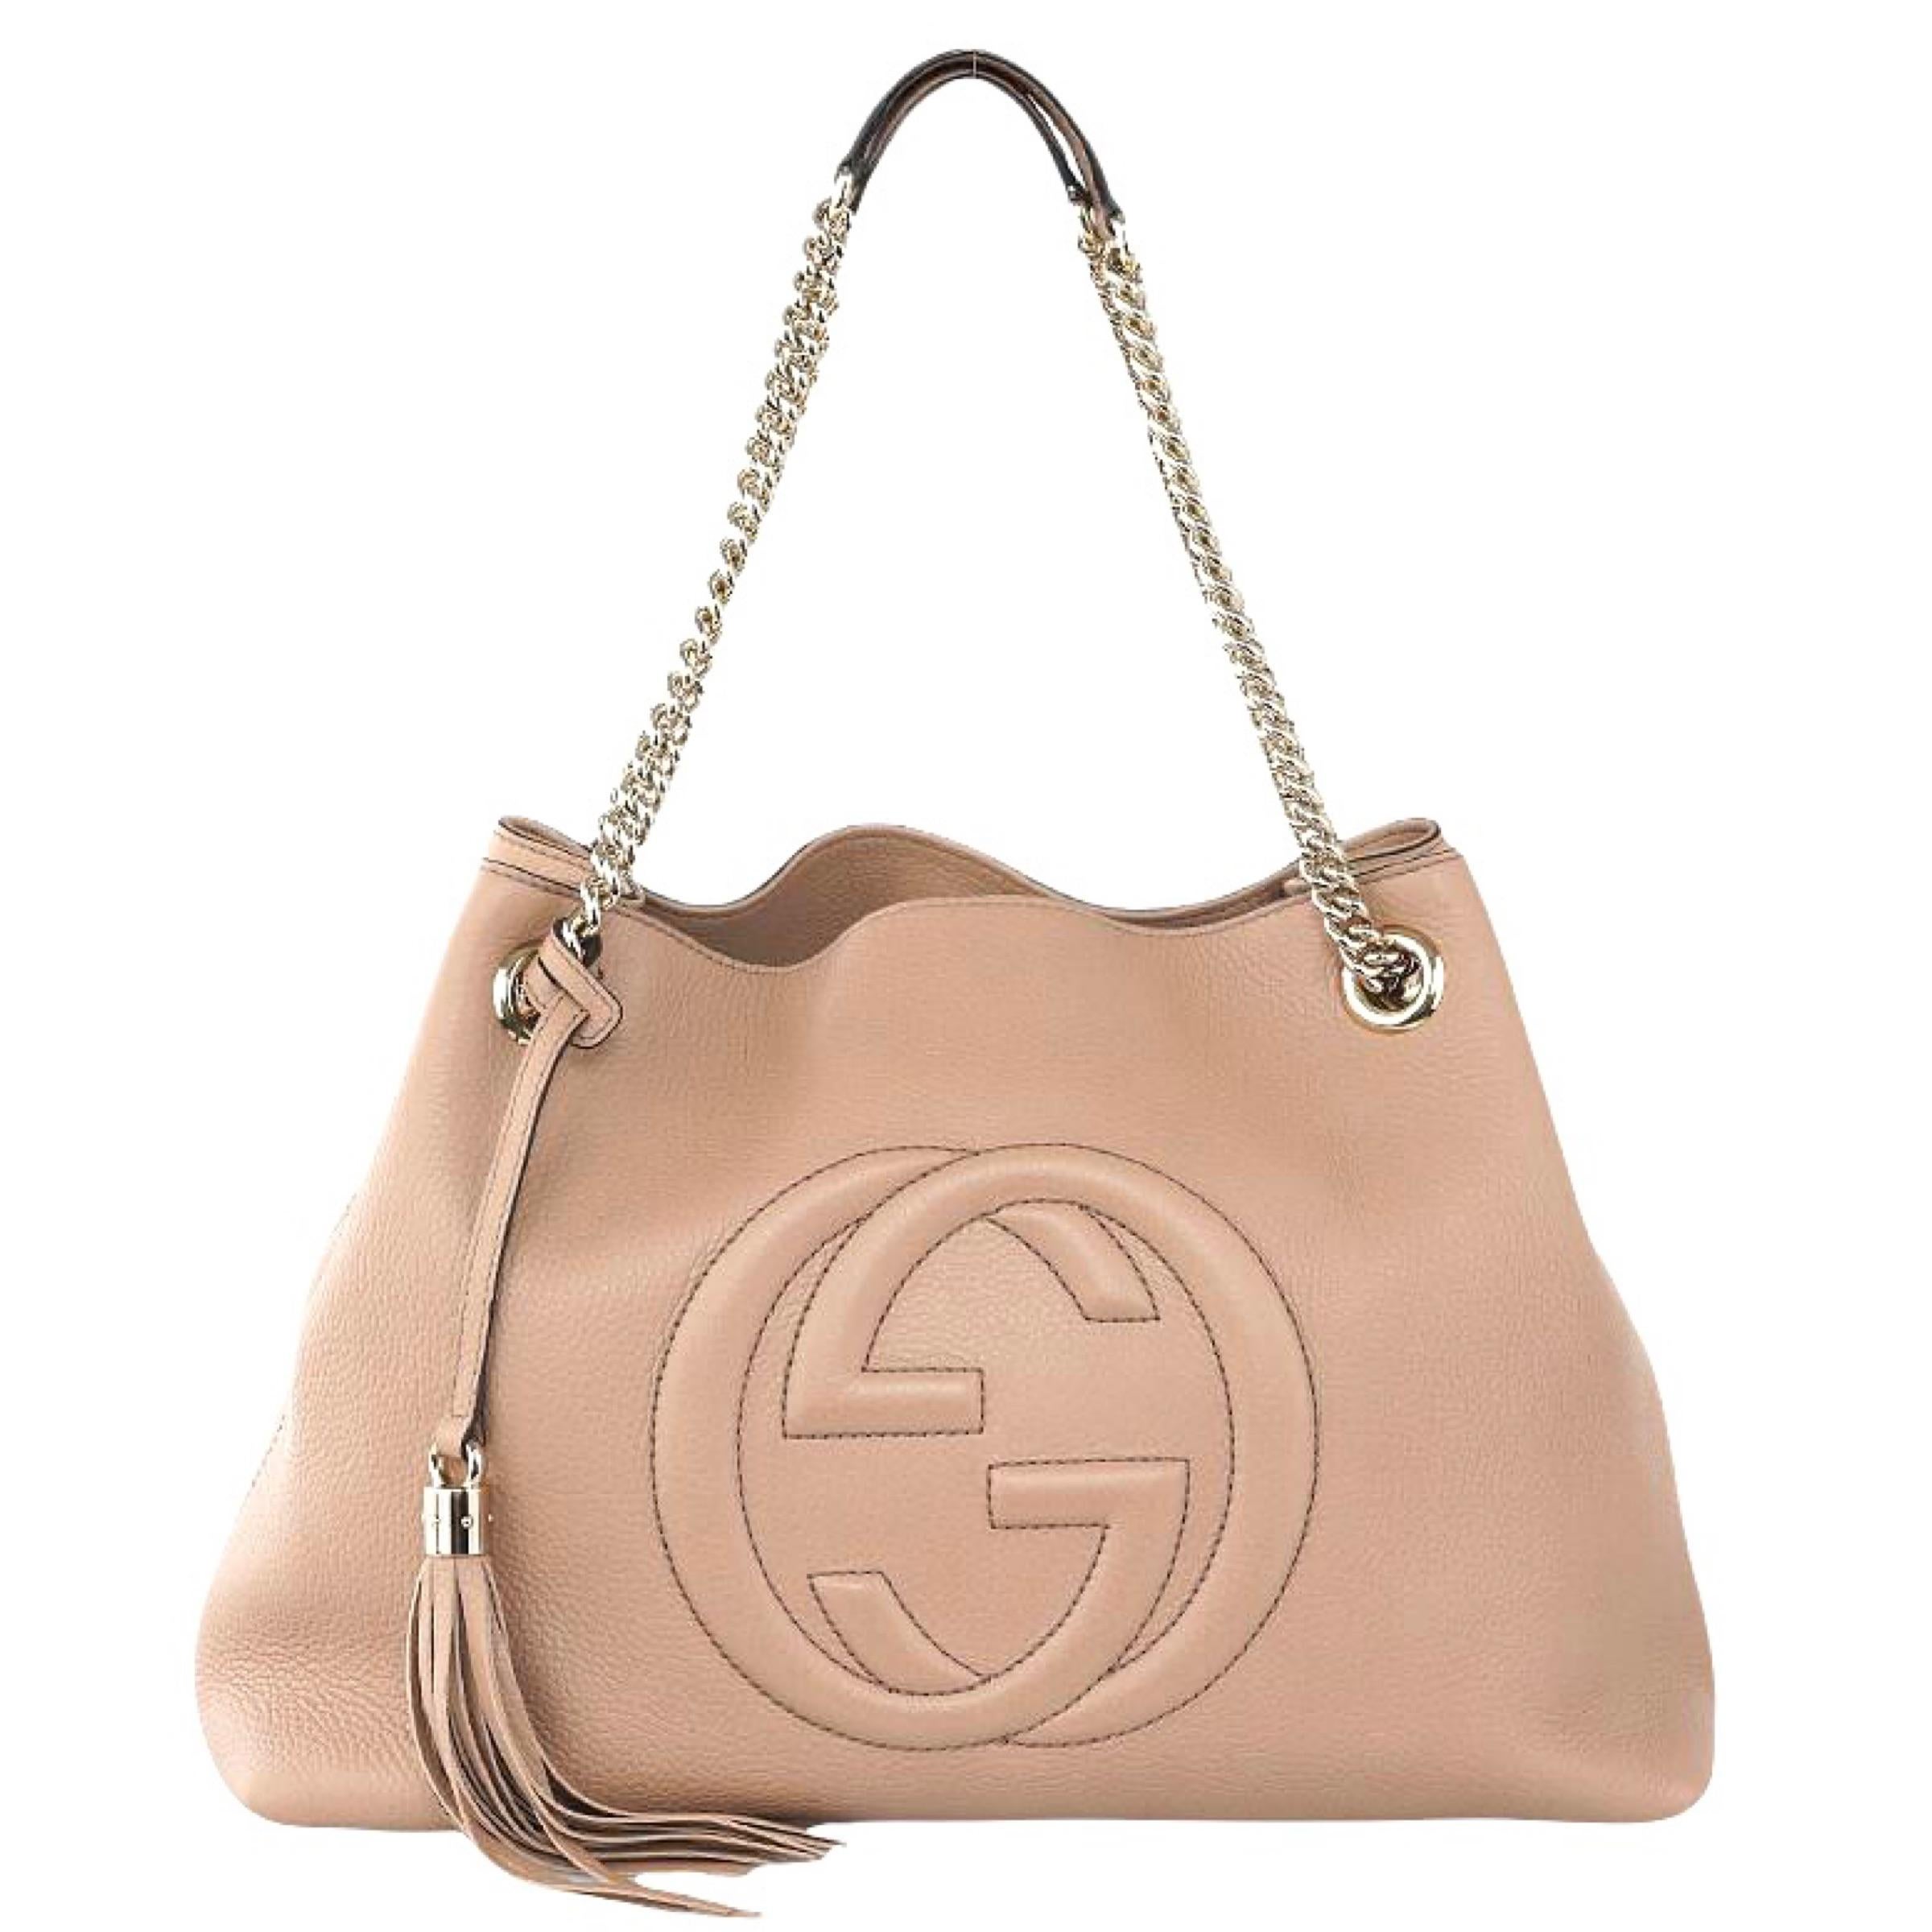 Women's NEW Gucci Beige Pebbled Leather Medium Soho Chain Tote Shoulder Bag For Sale